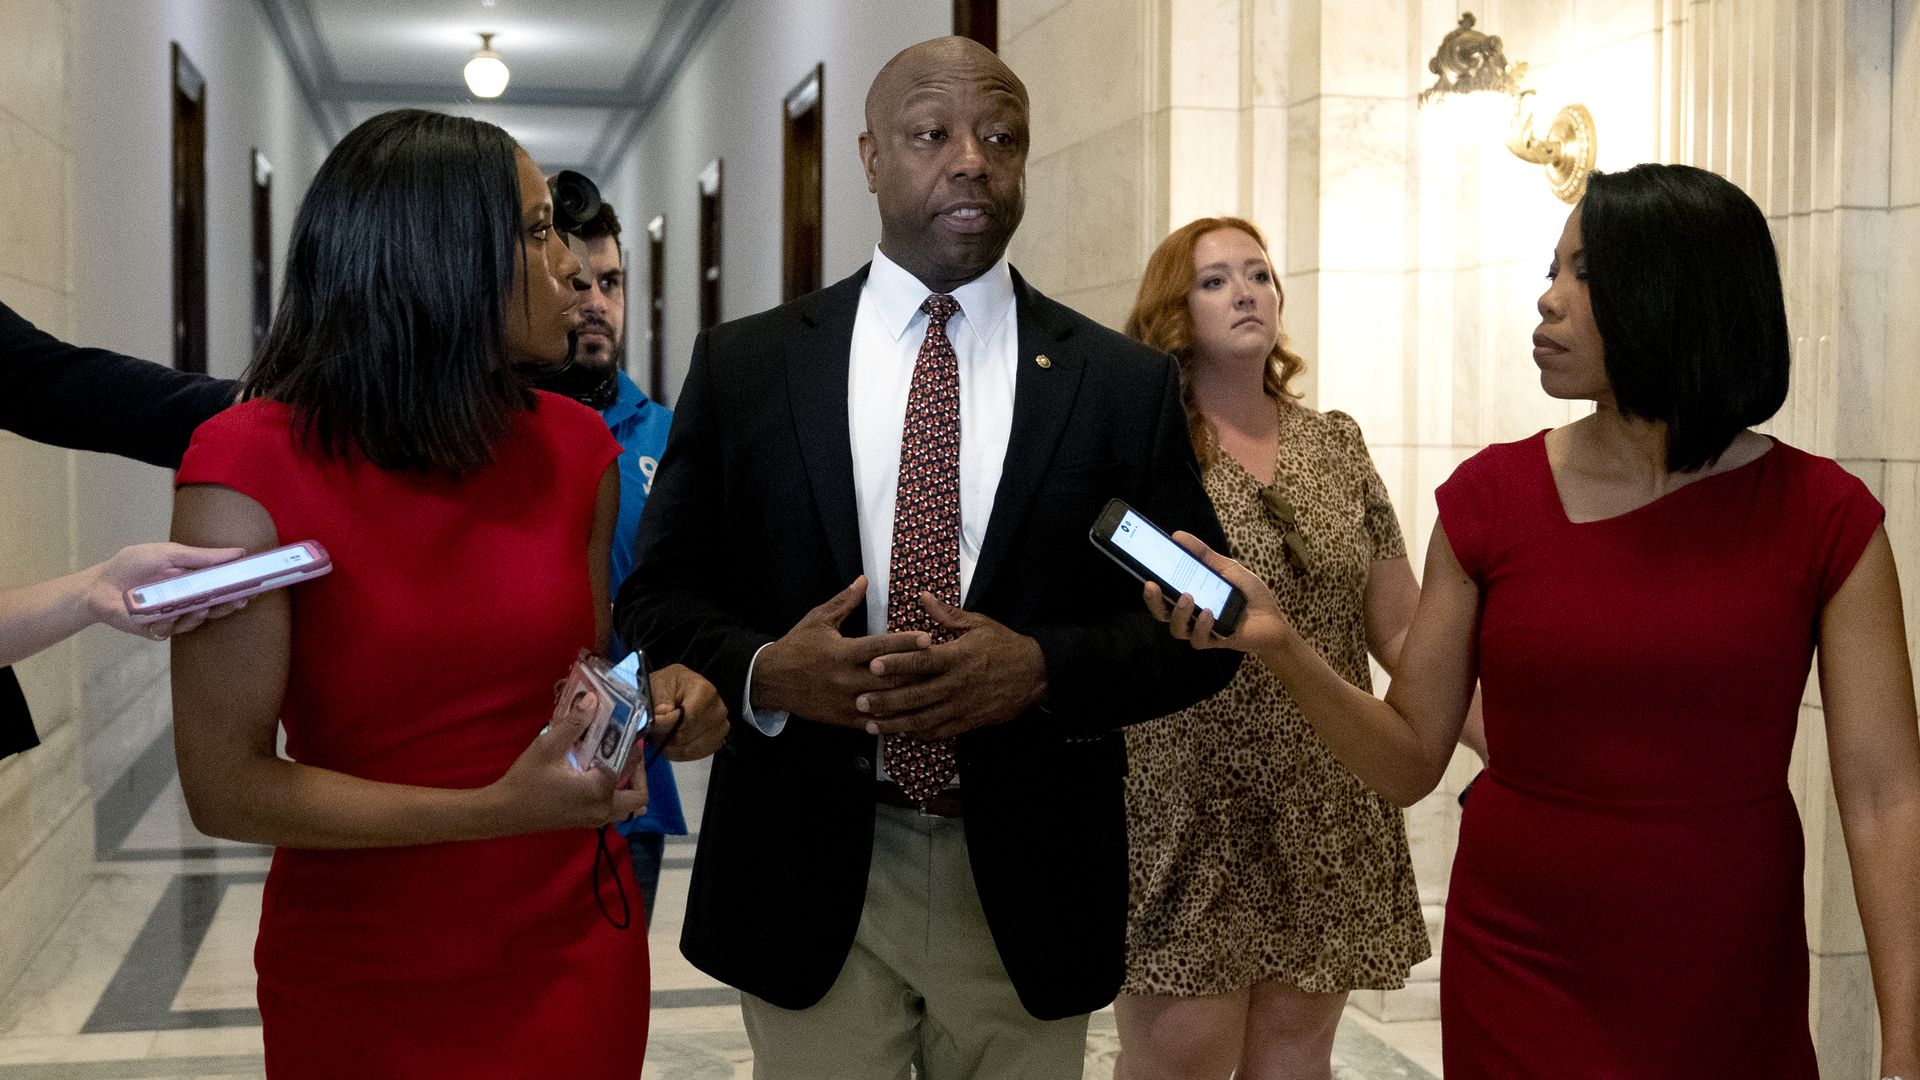 Sen. Tim Scott is seen speaking with reporters while walking through the Russell Office Building.